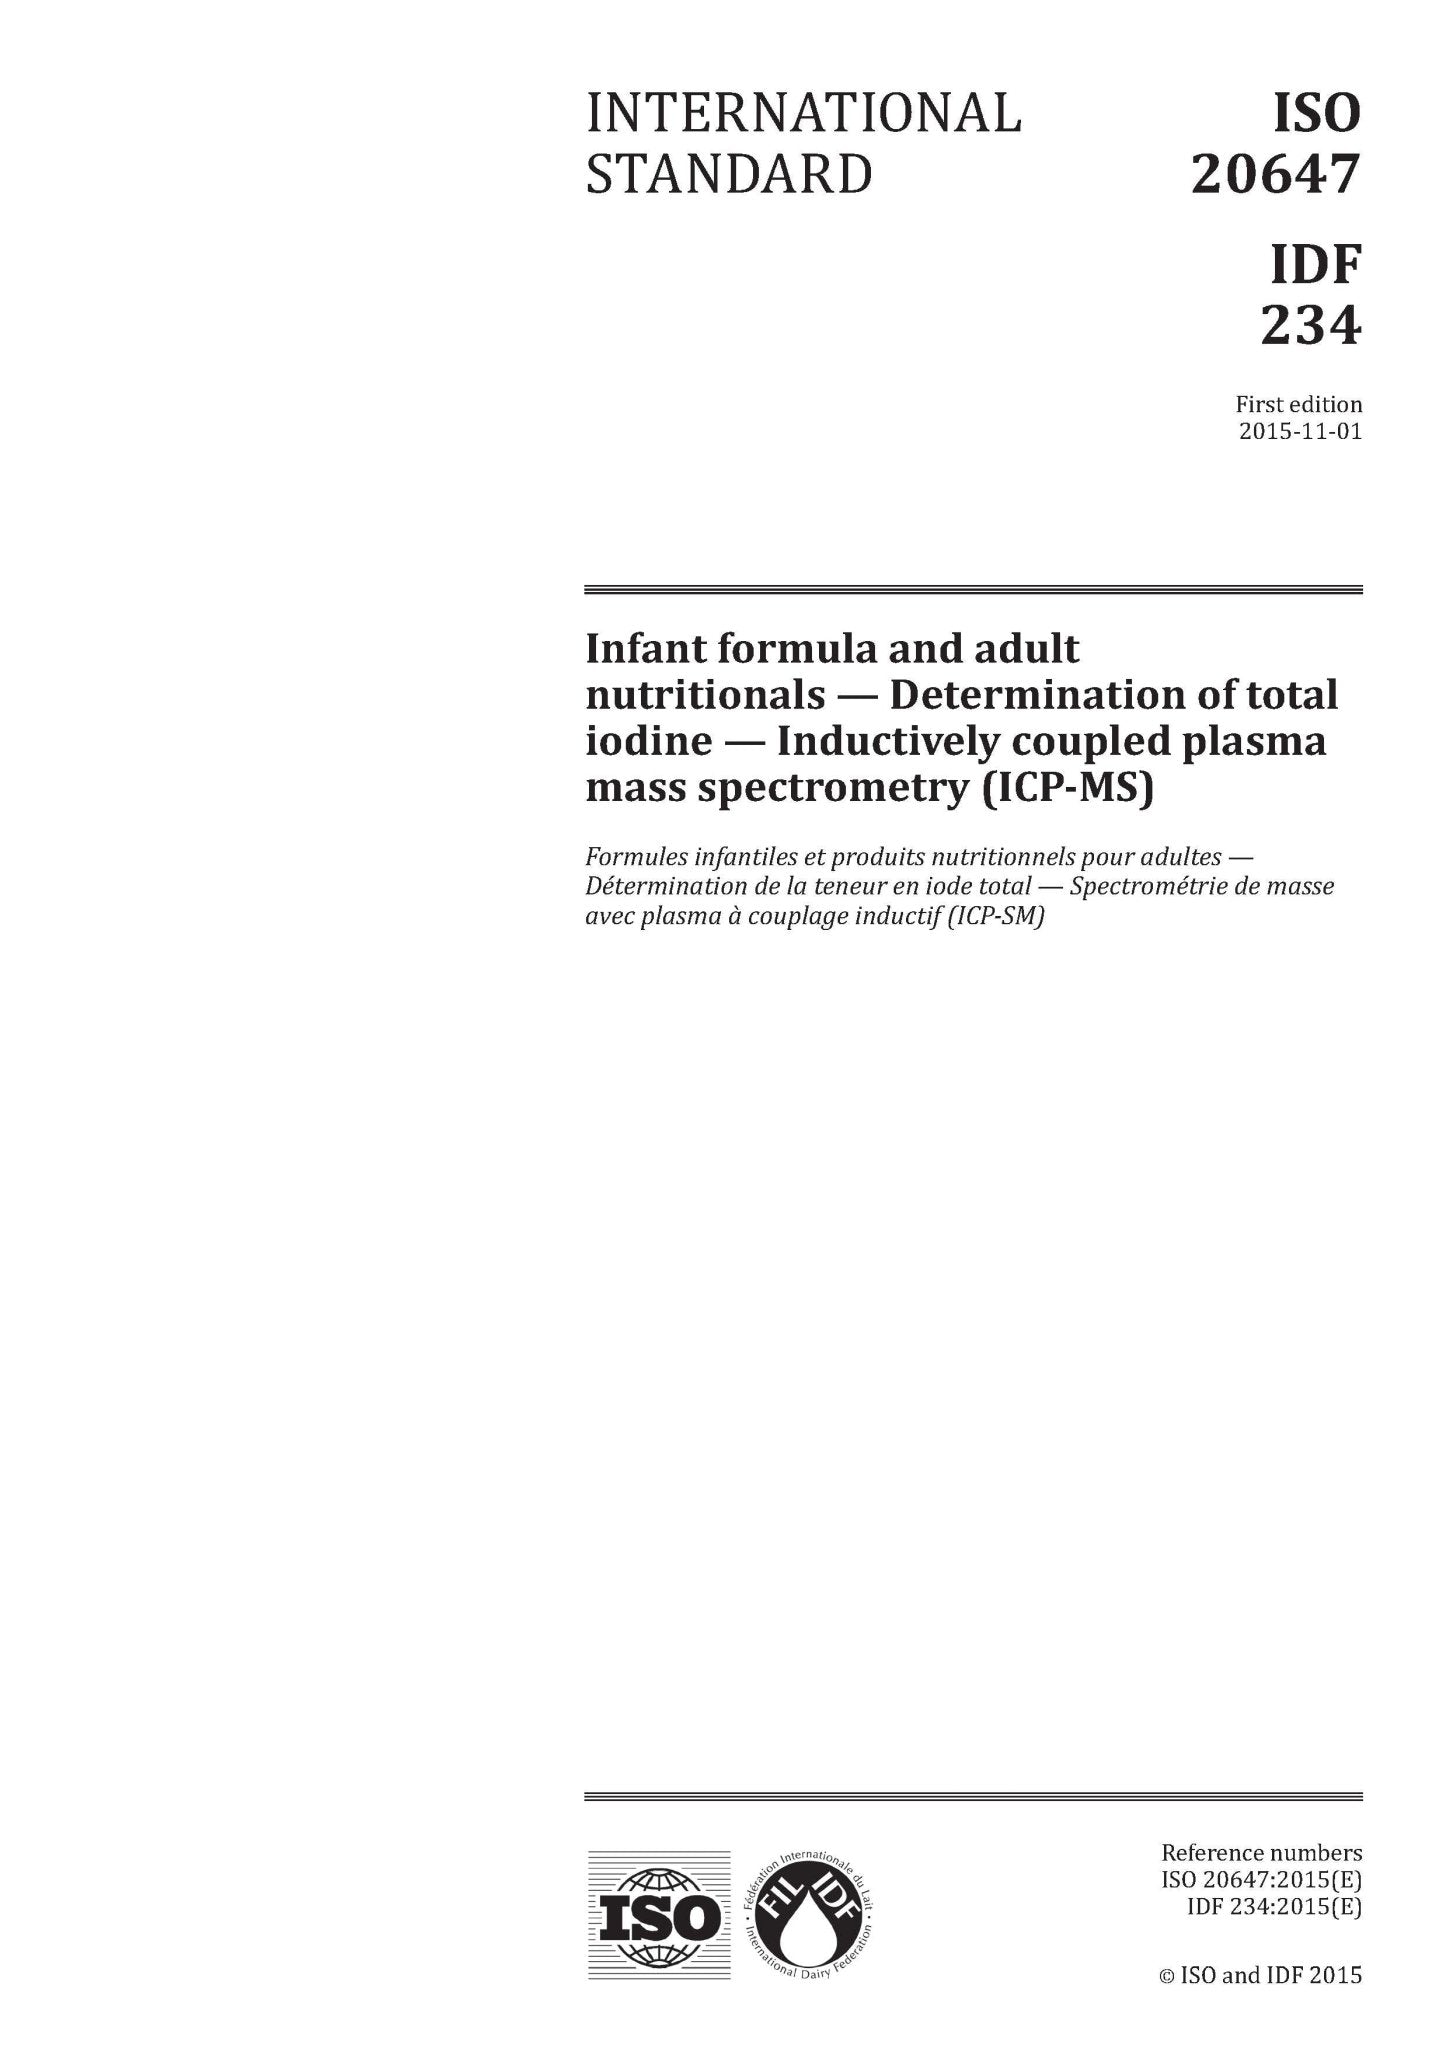 ISO 20647 | IDF 234: 2015 - Infant formula and adult nutritionals - Determination of total iodine - Inductively coupled plasma mass spectrometry (ICP-MS) - FIL-IDF